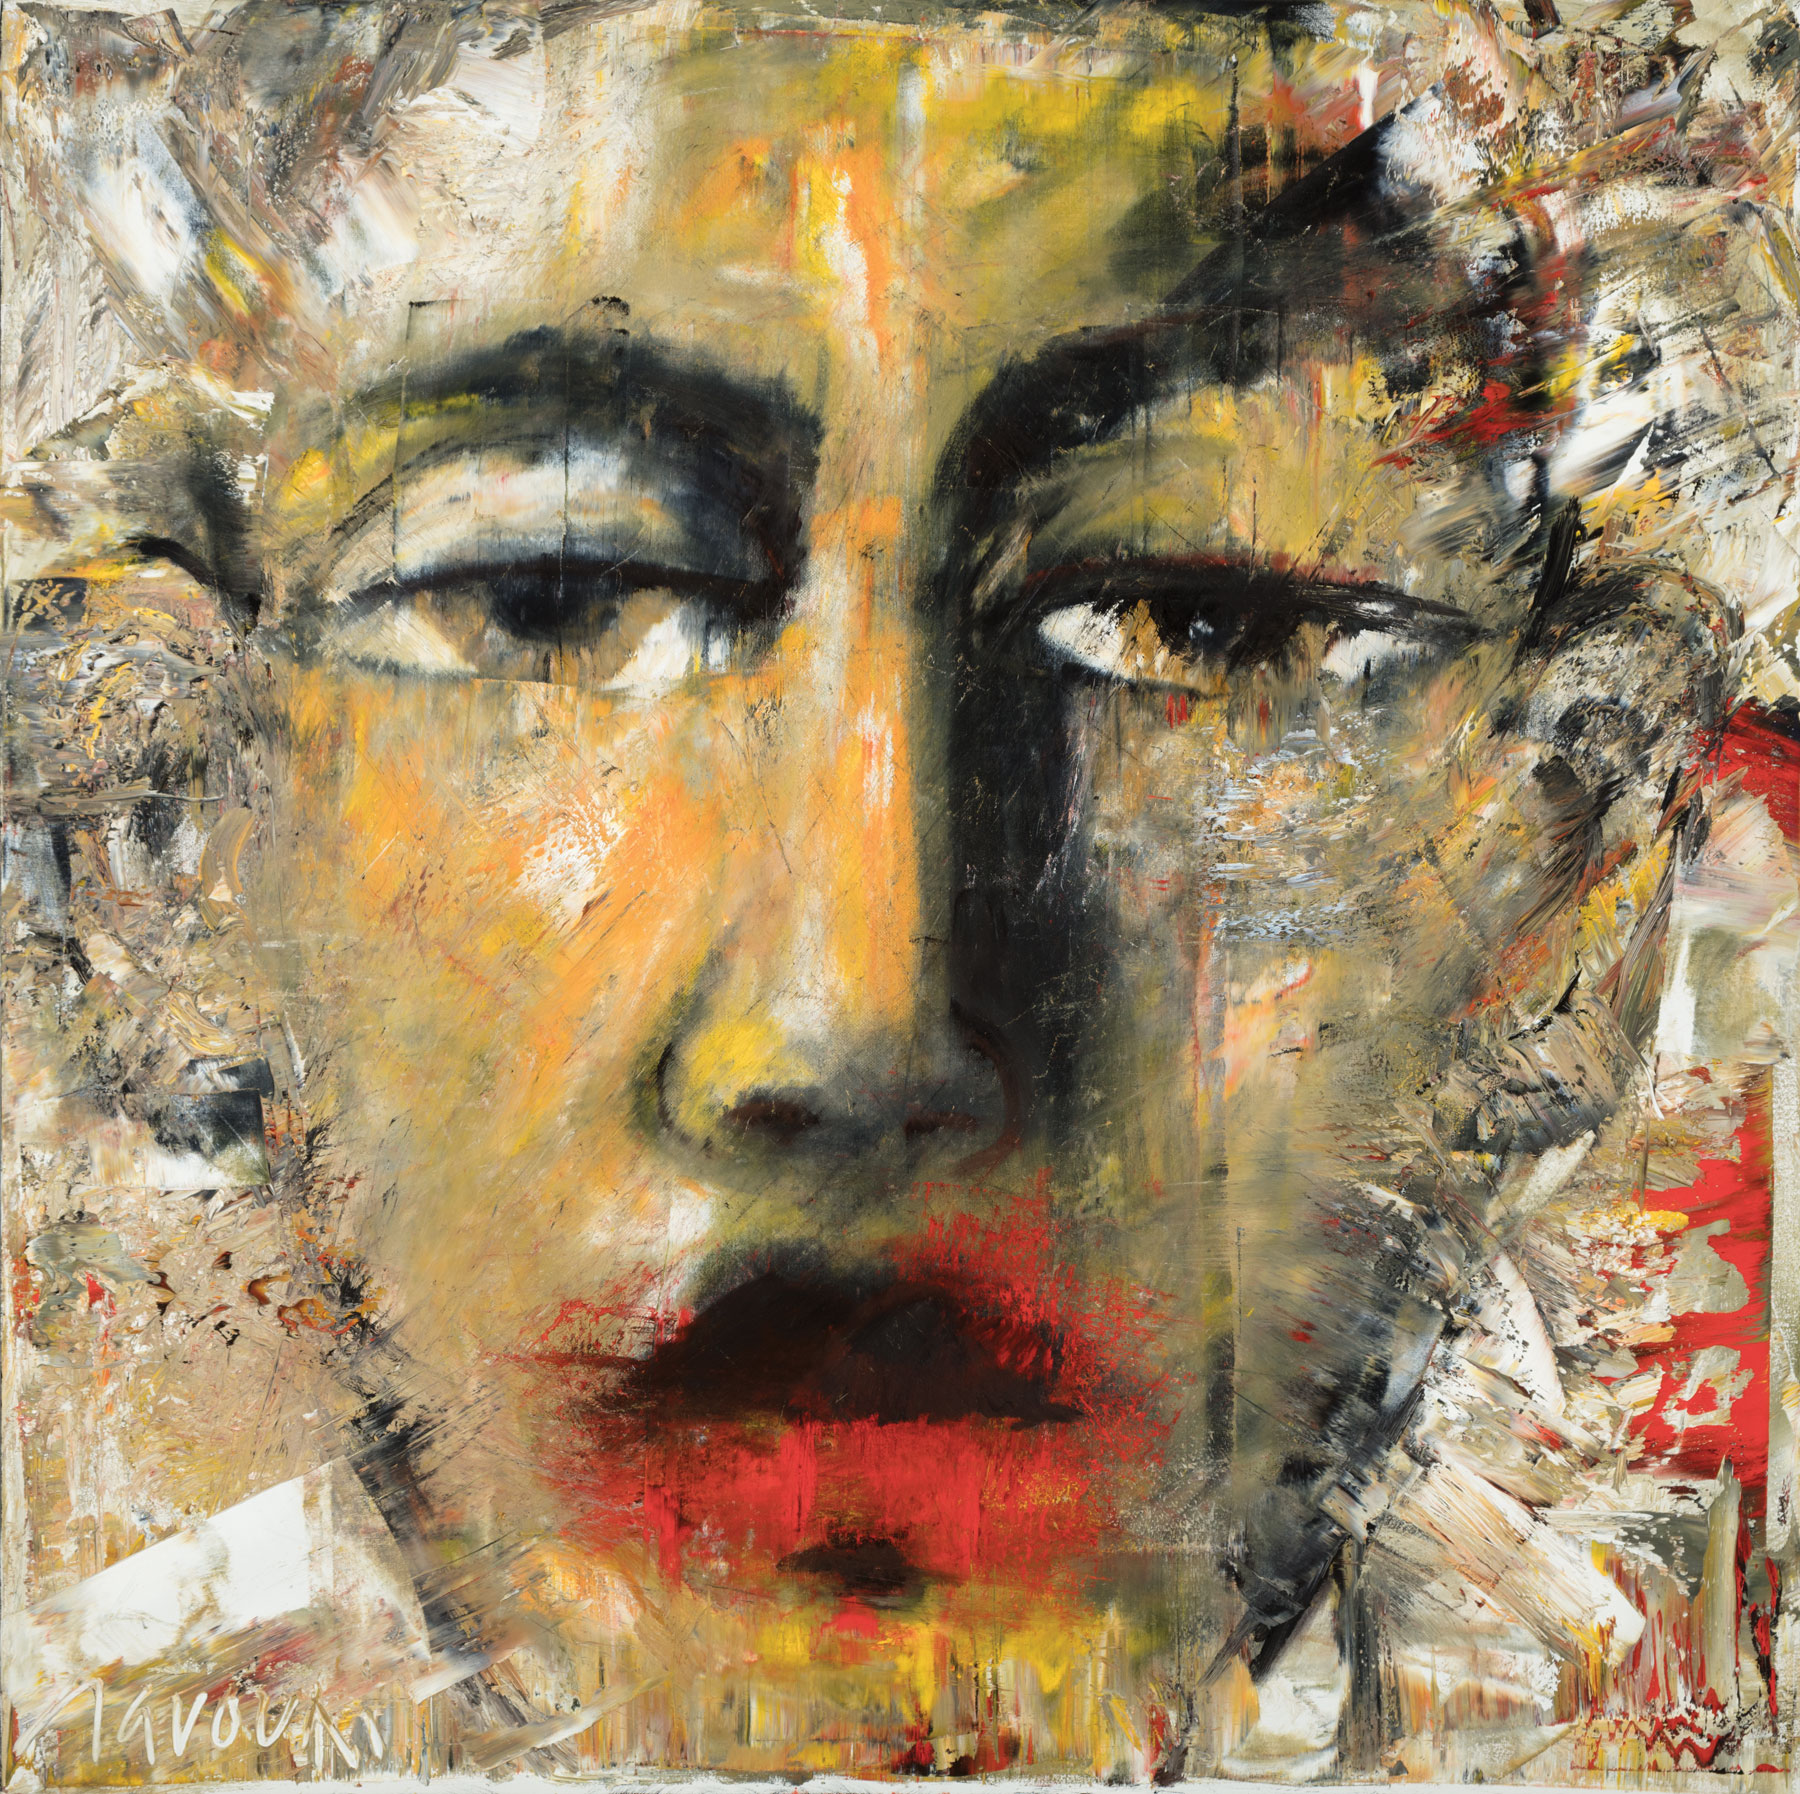 David Harouni (Iranian/New Orleans, b. 1962) , "Untitled (Face)", 1998, oil on gallery-wrapped